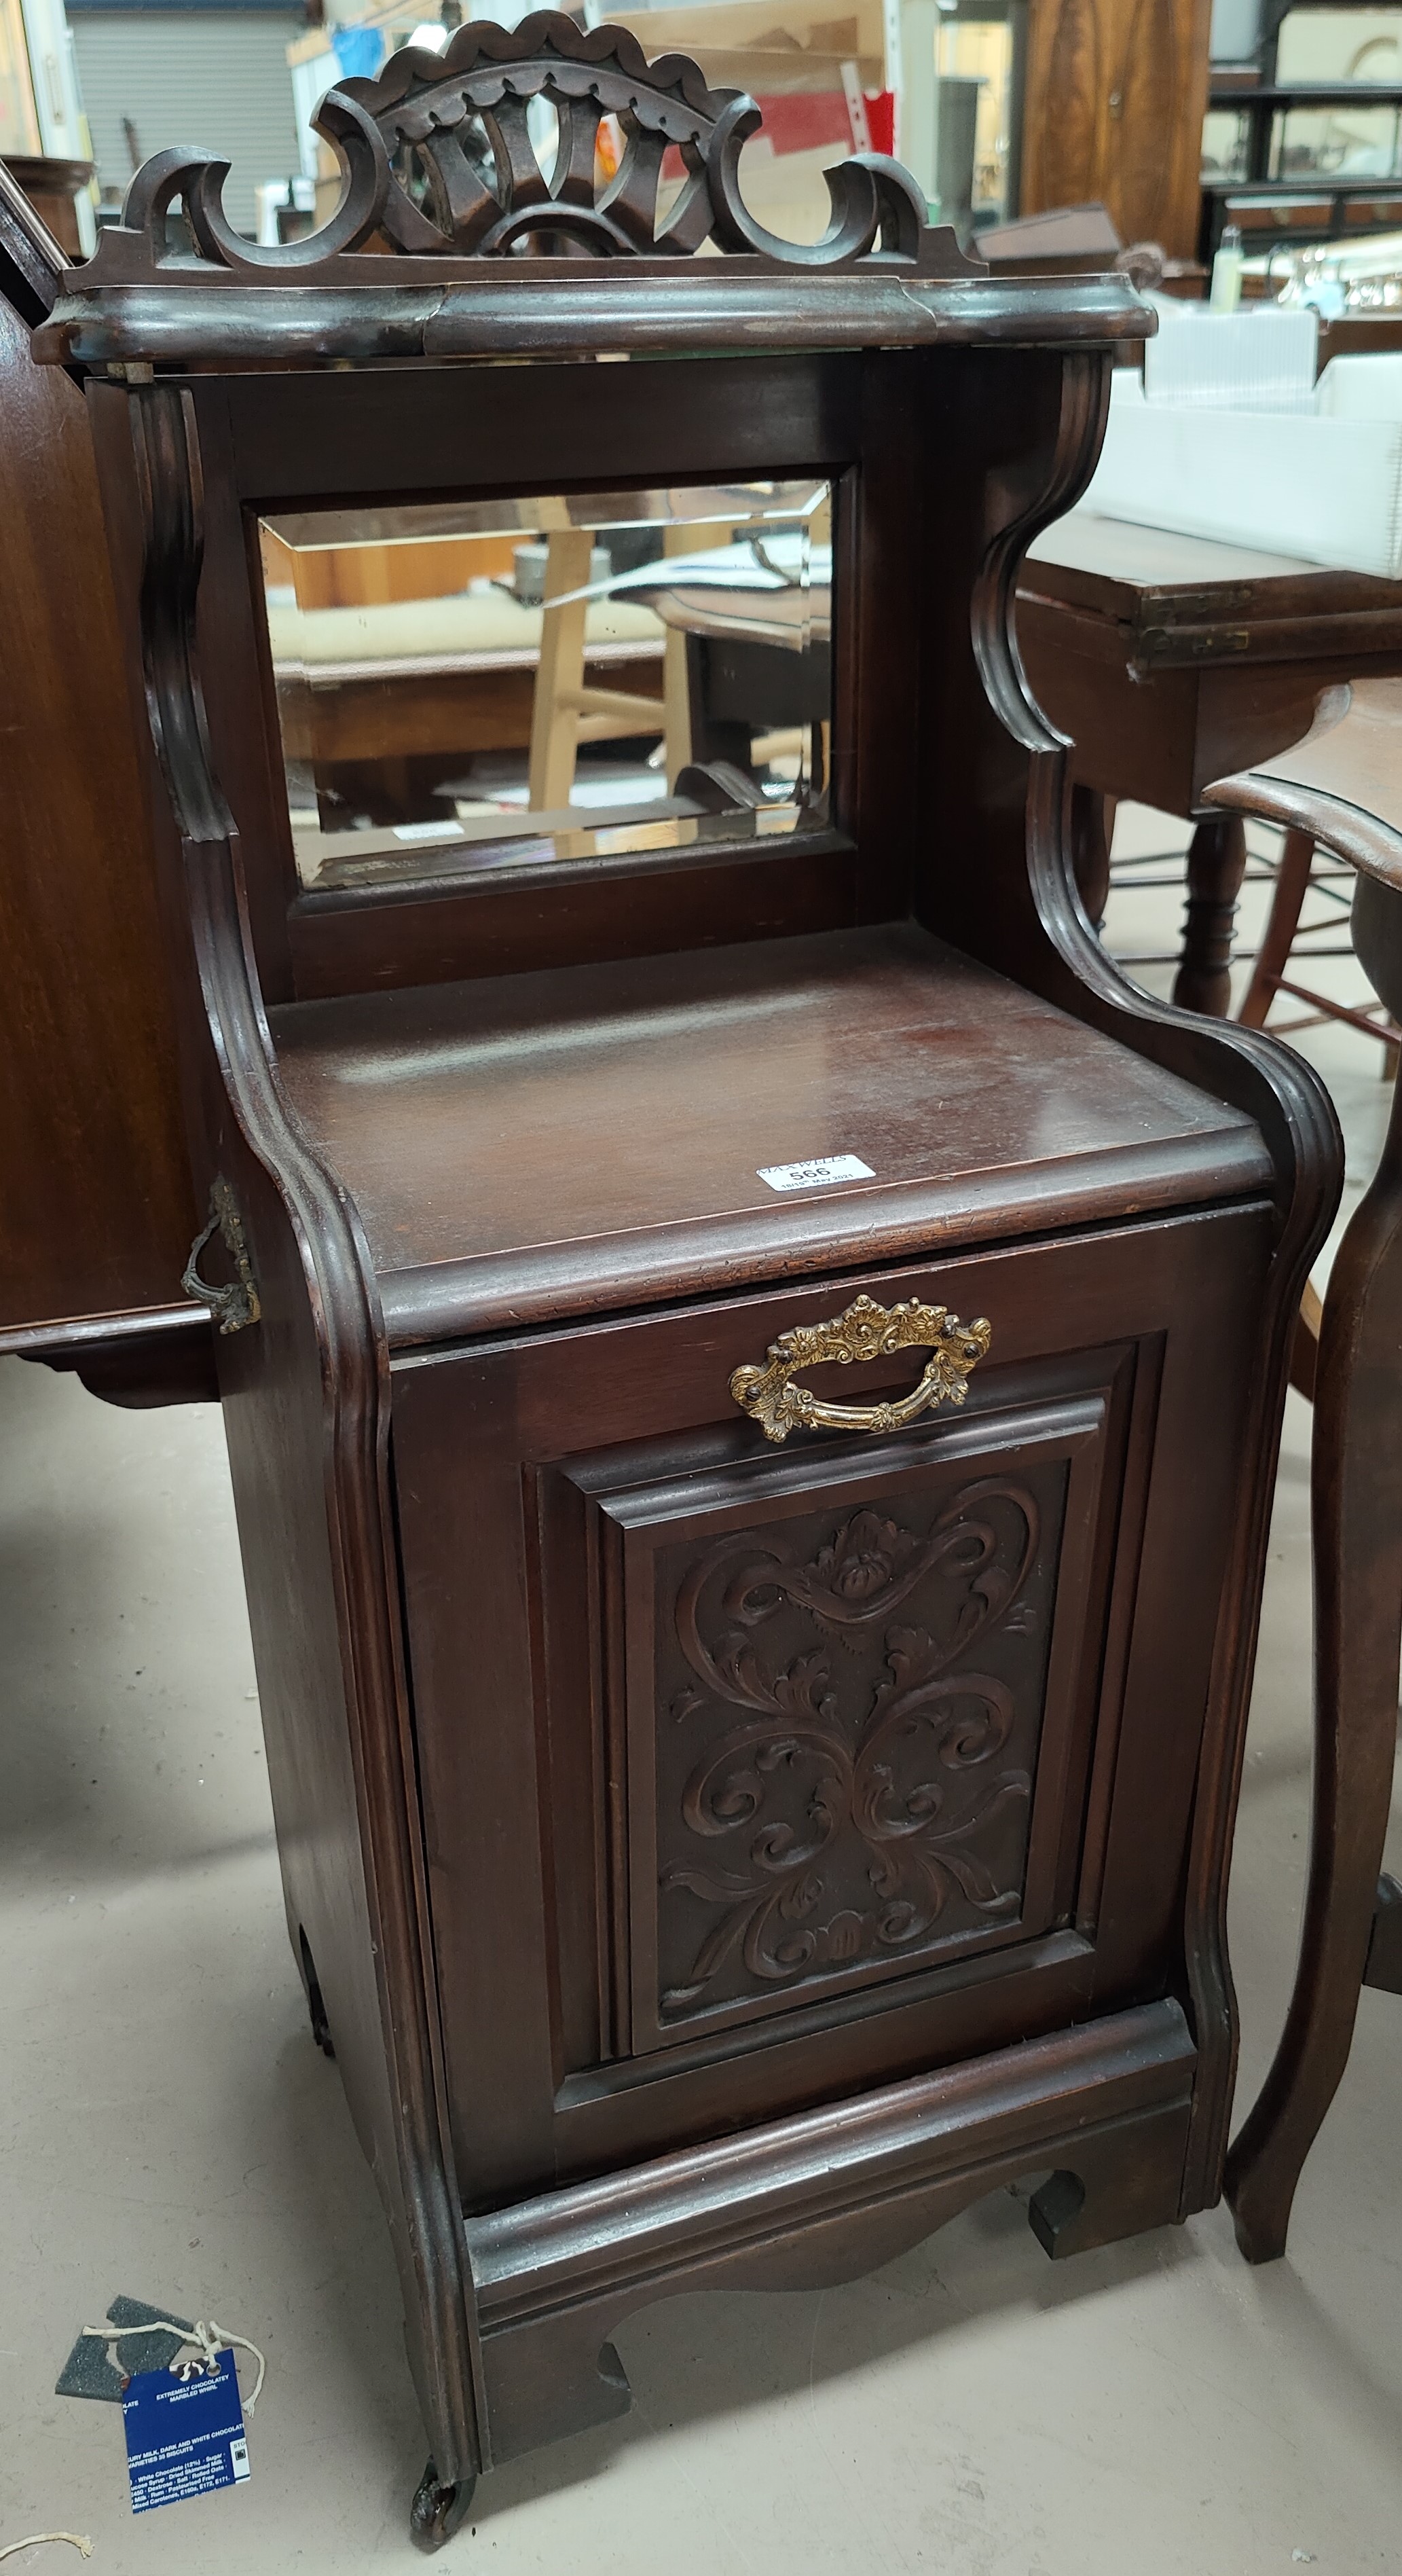 An Edwardian carved mahogany fall front coal box with mirror and shelf over